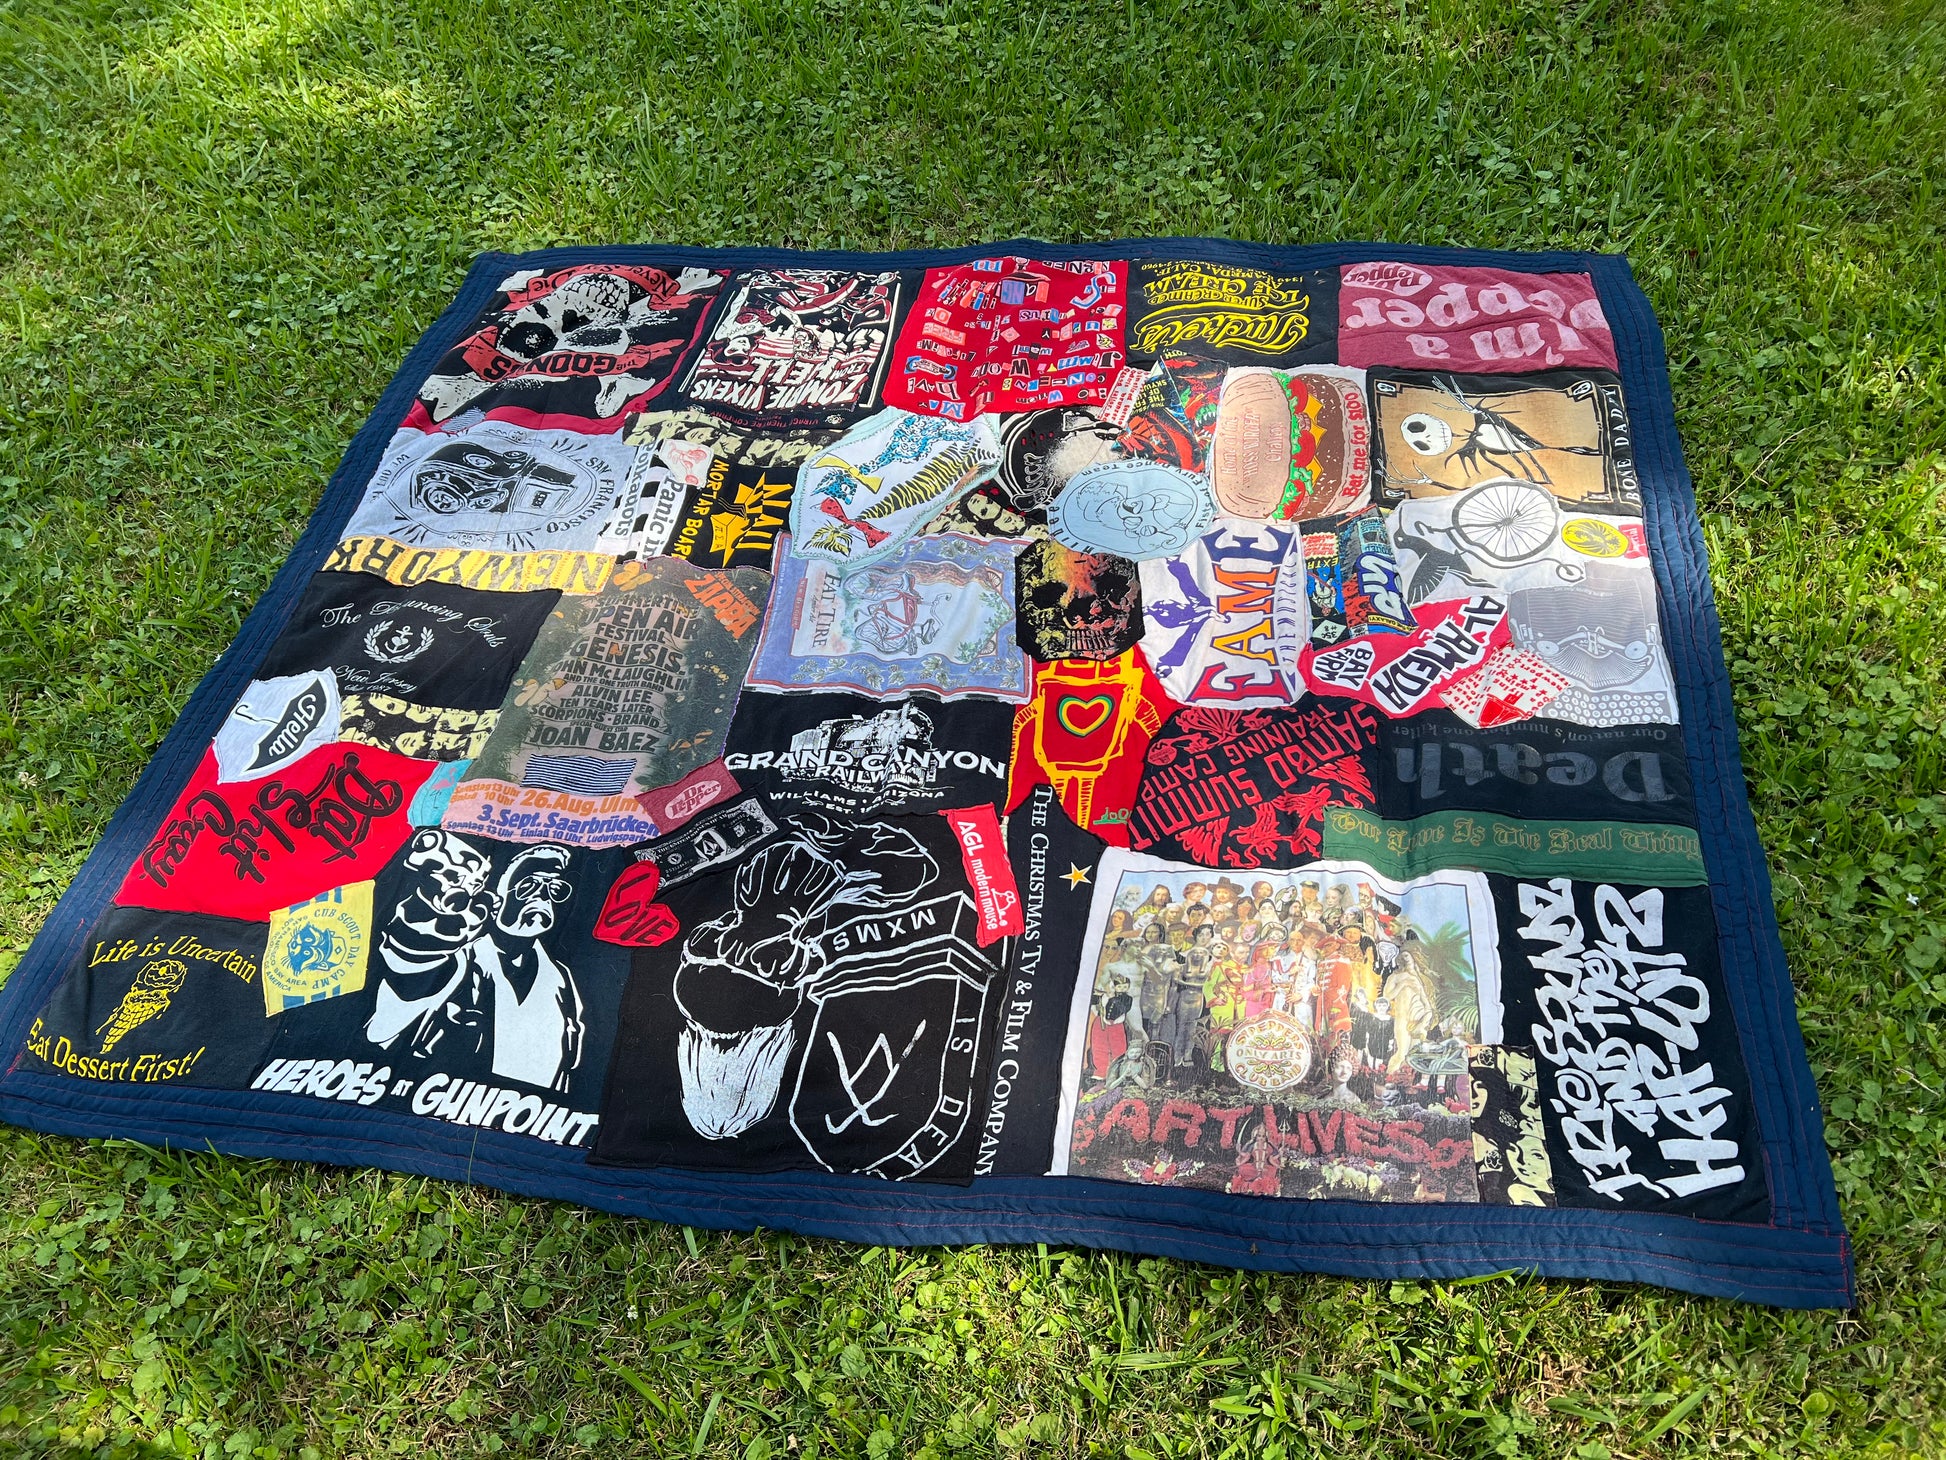 A collage-style tshirt quilt laid out on a nice patch of green grass